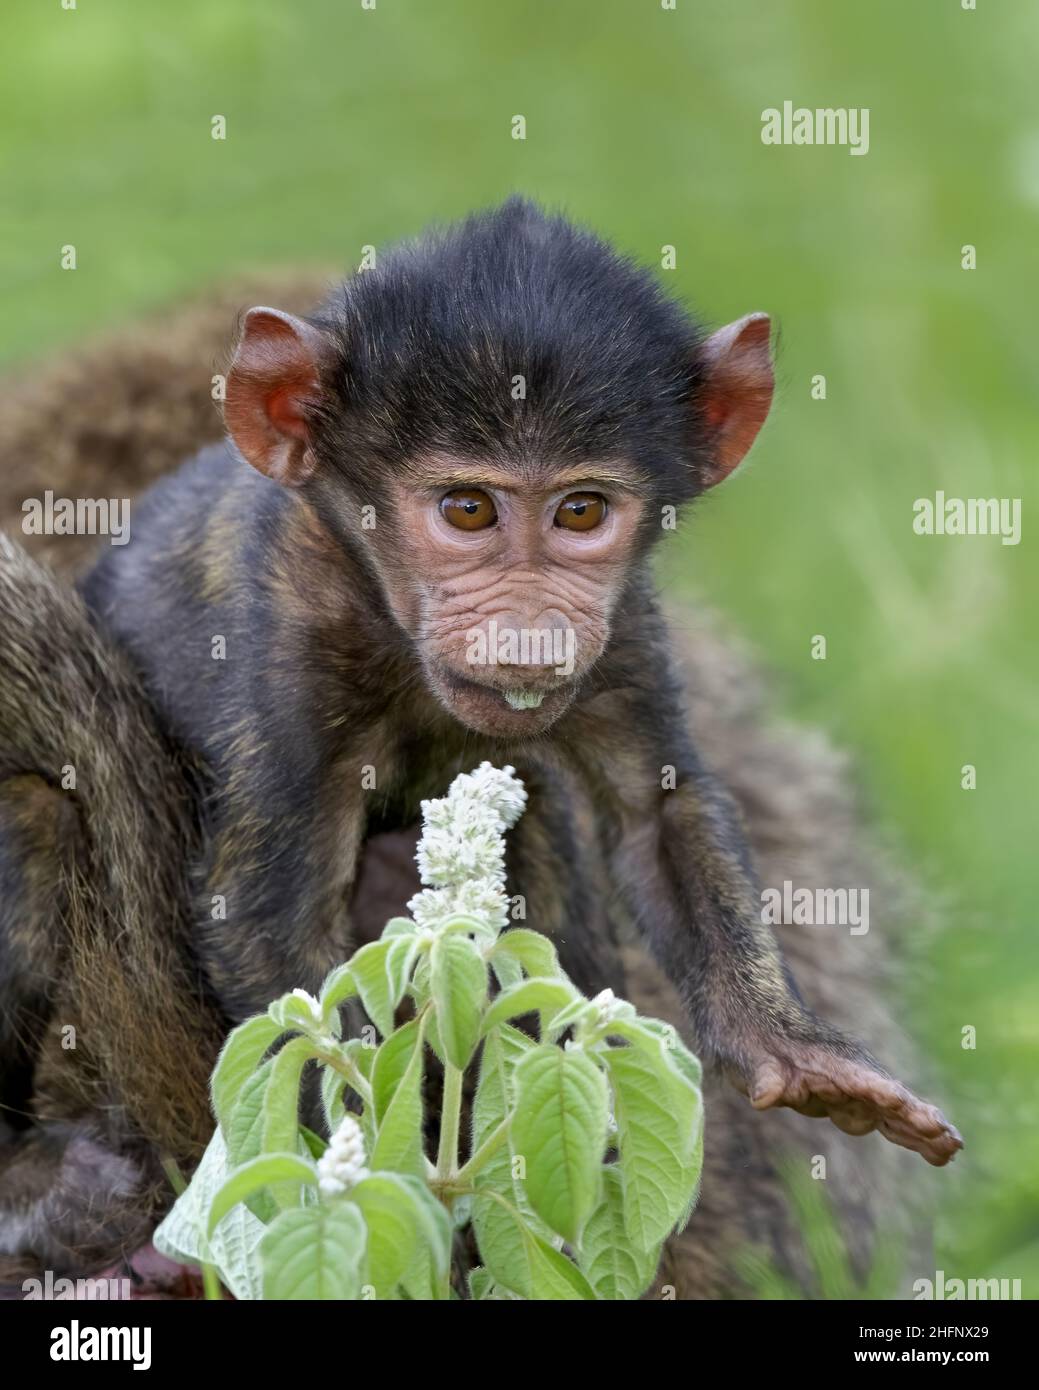 Baby olive baboon (Papio anubis) tasting a flower in the Ngorongoro Crater, Tanzania, Africa Stock Photo